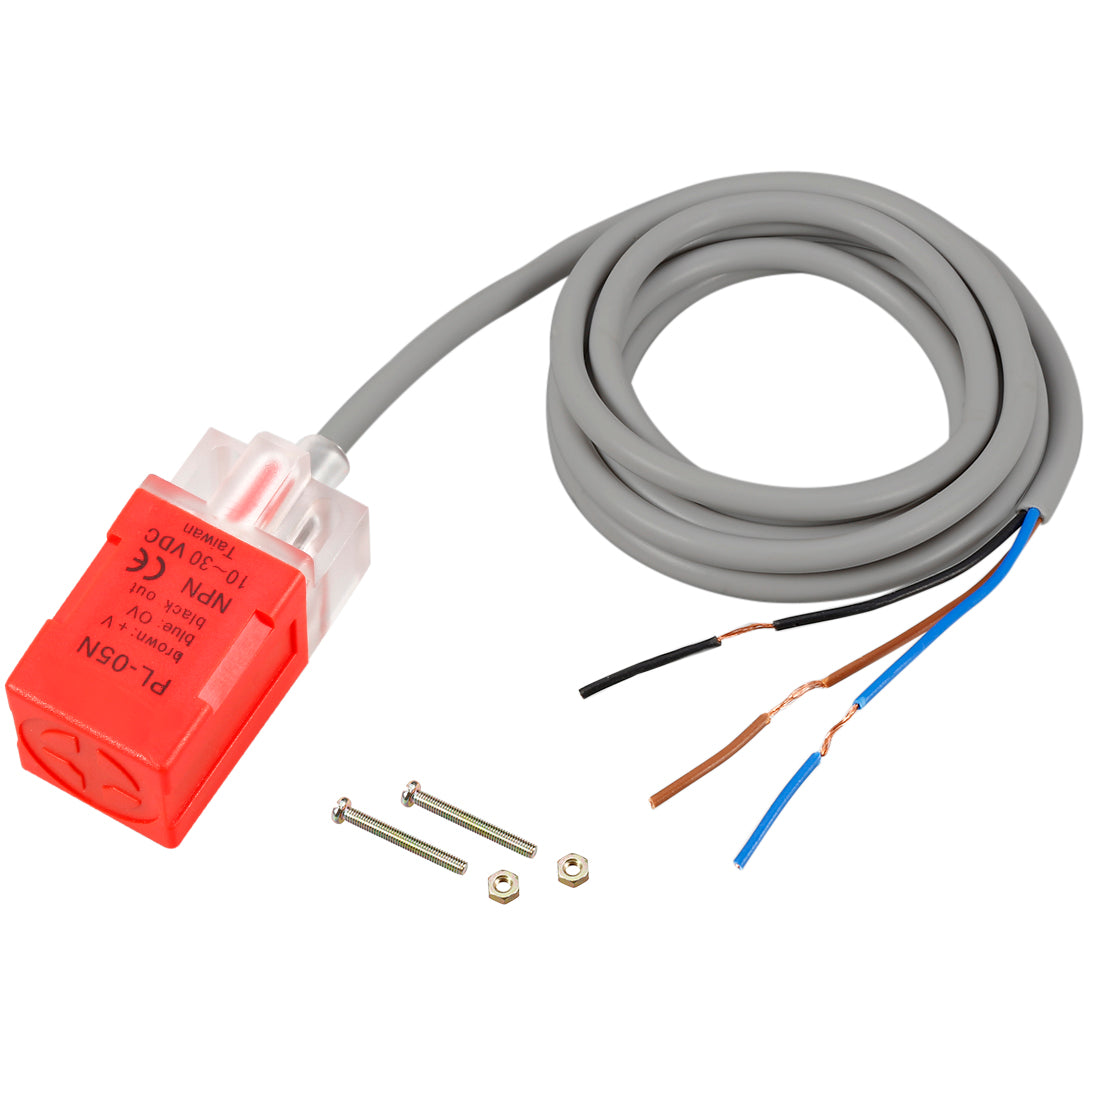 uxcell Uxcell PL-05N 3-Wire DC 10-30V 200mA NPN NO 5mm Inductive Proximity Sensor Detection Switch